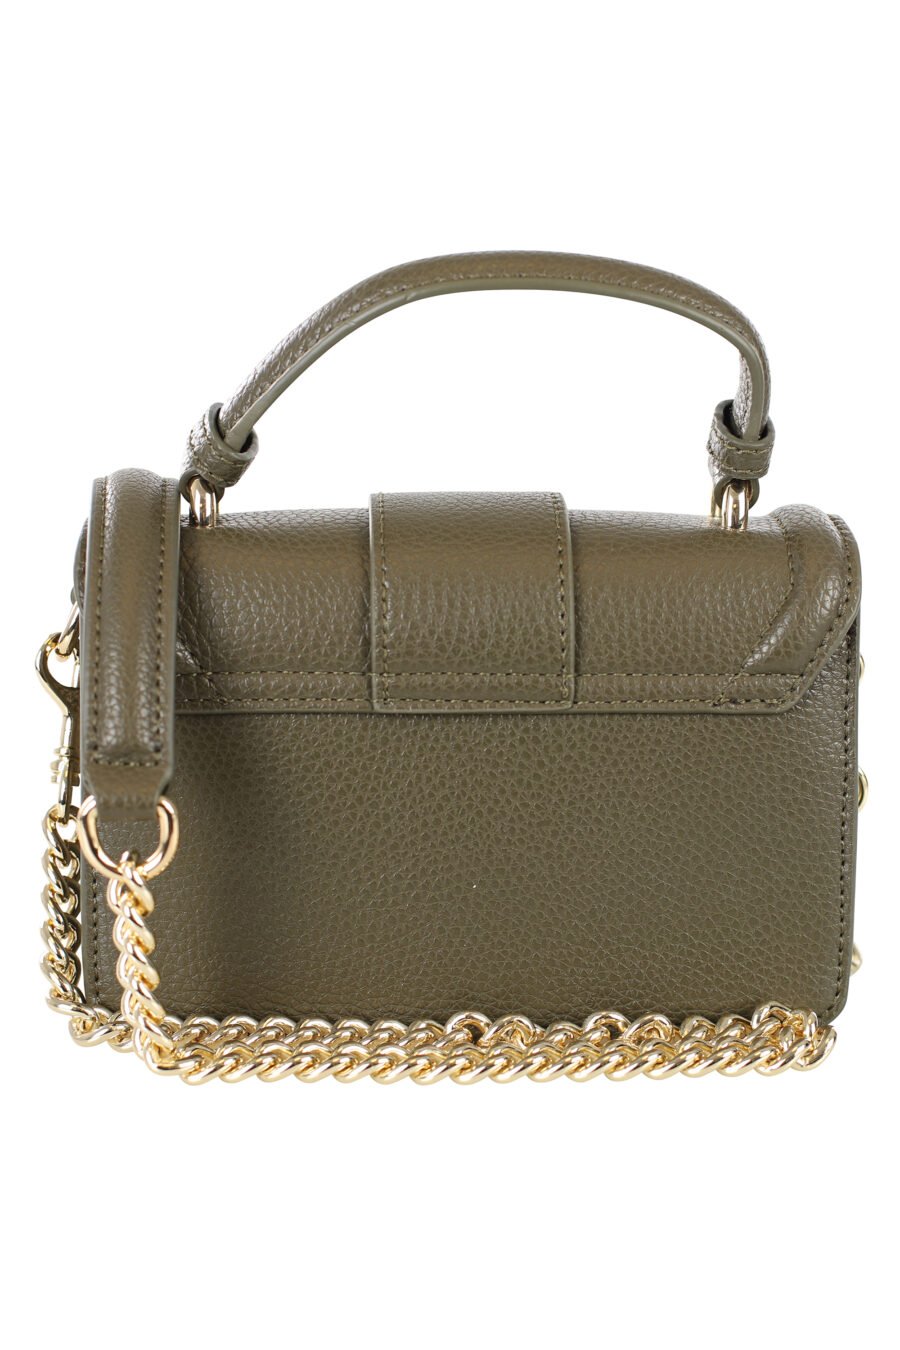 Military green mini shoulder bag with logo baroque buckle - IMG 7221